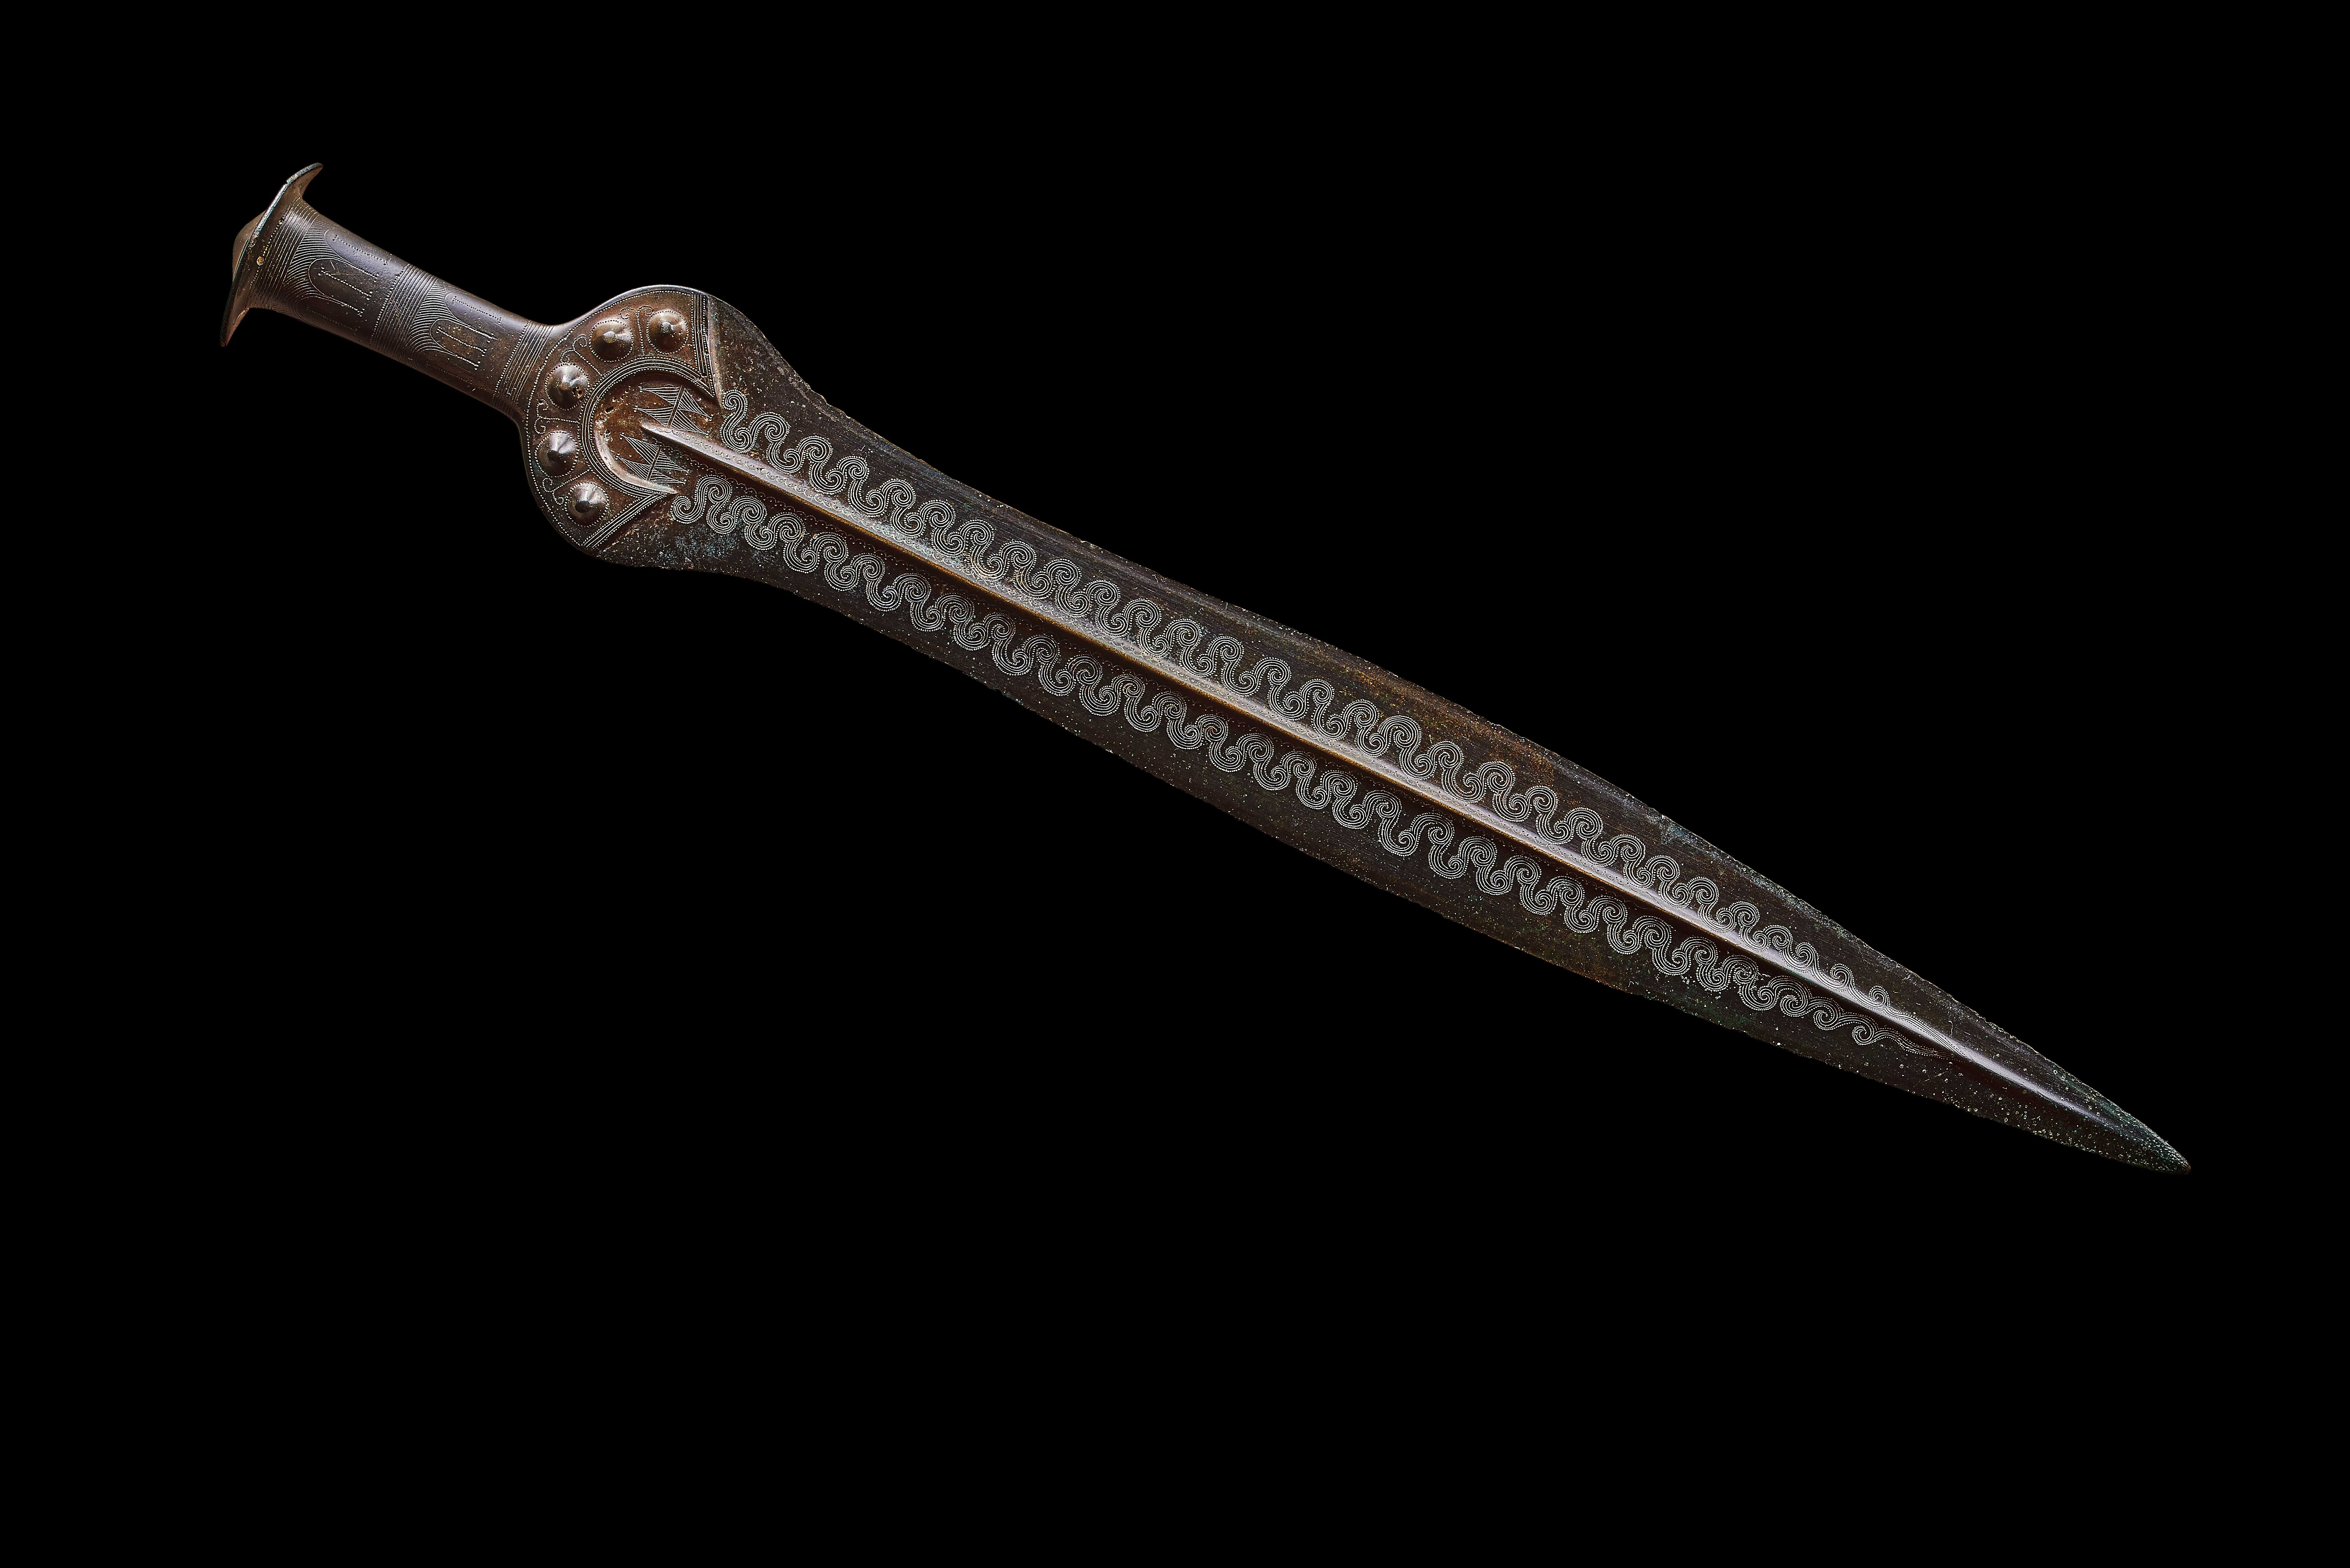 A bronze sword, with an etched serpentine pattern.